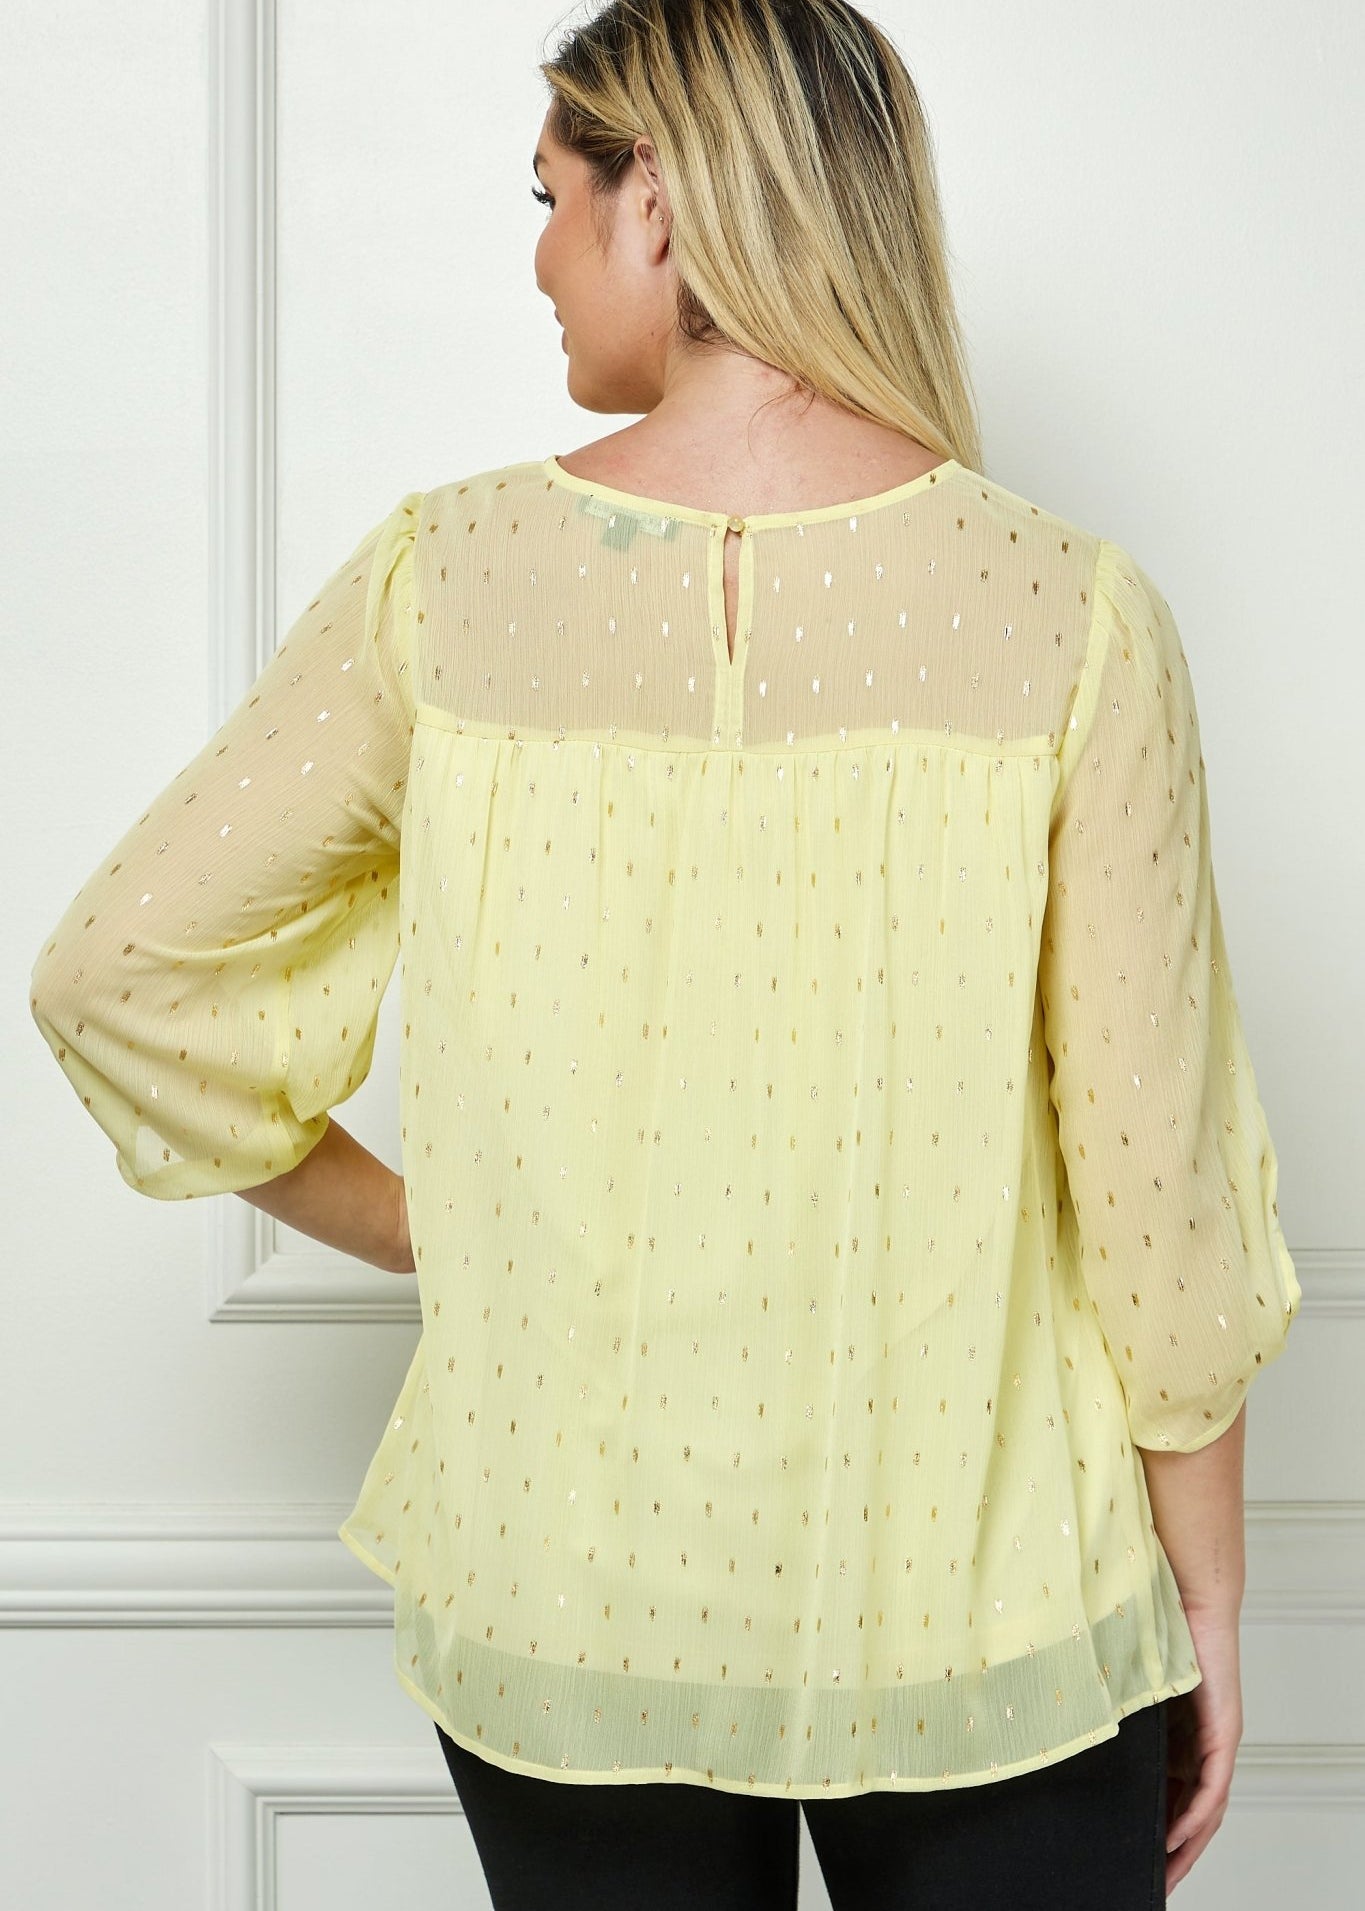 Sara Michelle Chamois & Gold 3/4 Knot Sleeve Scoop Neck Lined Blouse - Plus - DressbarnShirts & Blouses